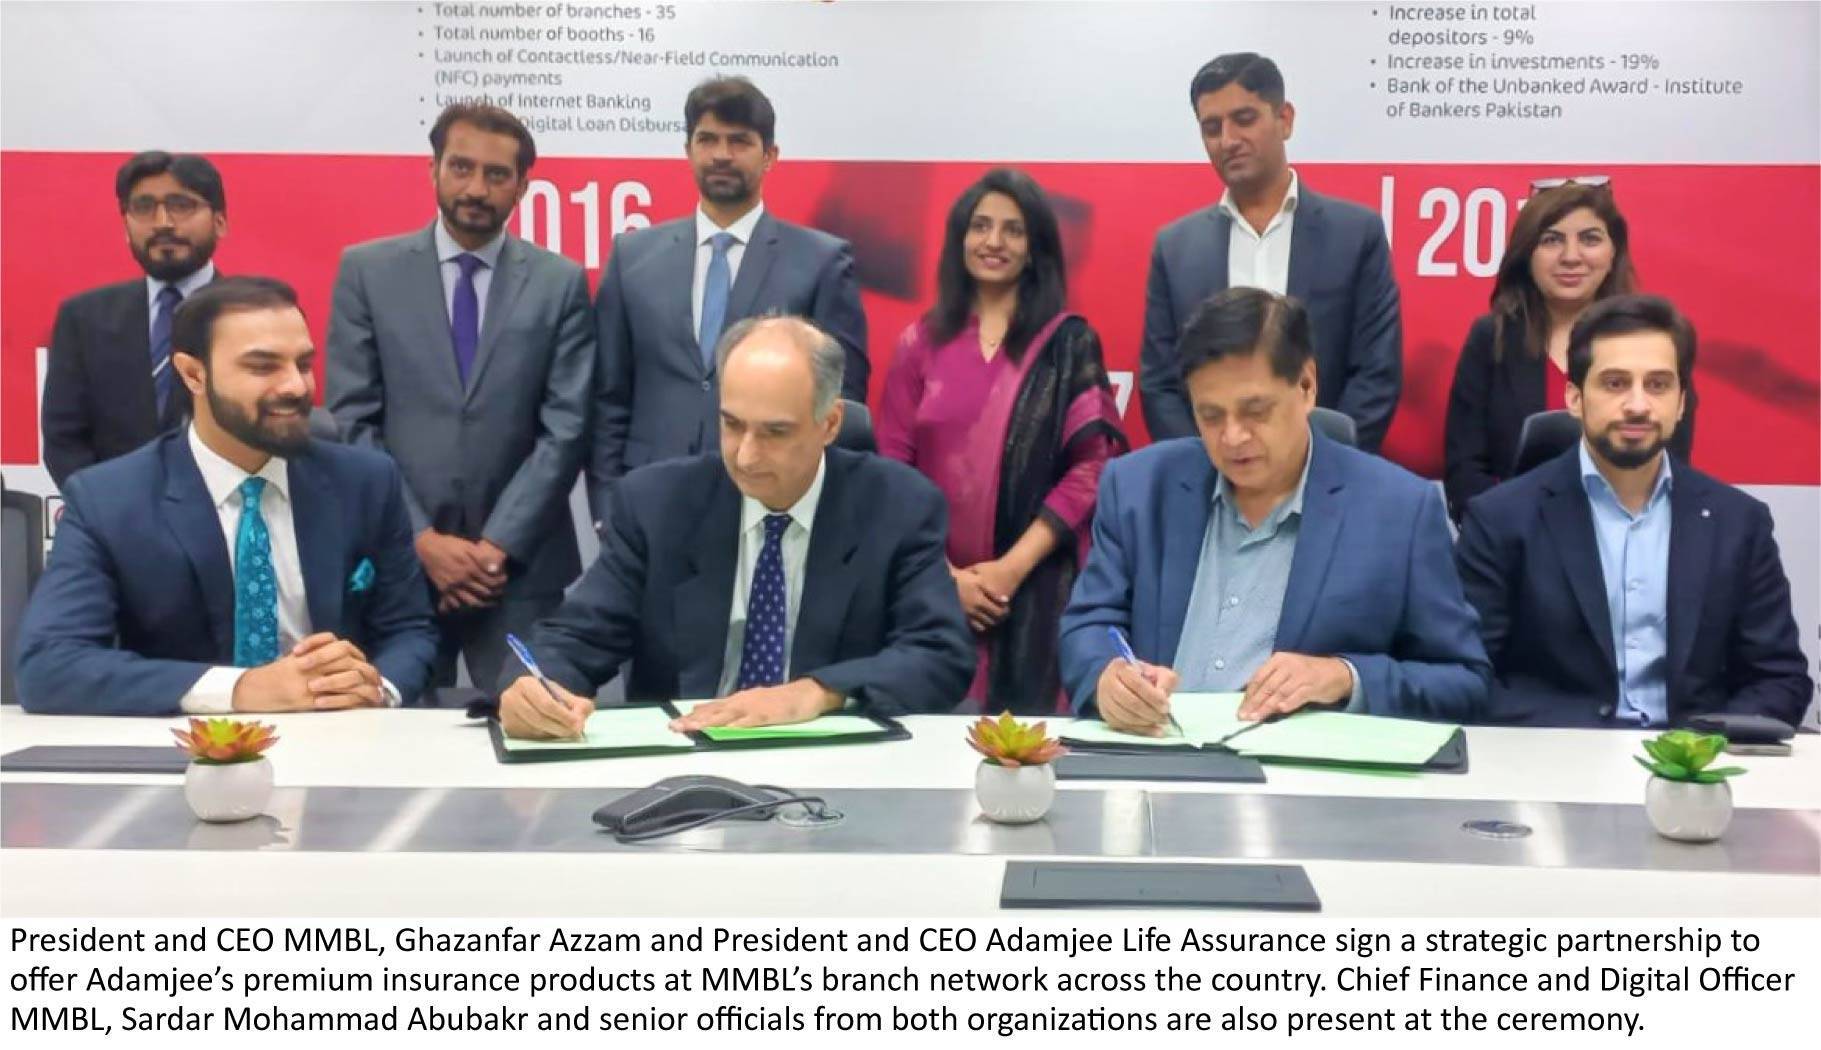 Mobilink Microfinance Bank to offer Adamjee Life Assurance products to customers across its nationwide branch network